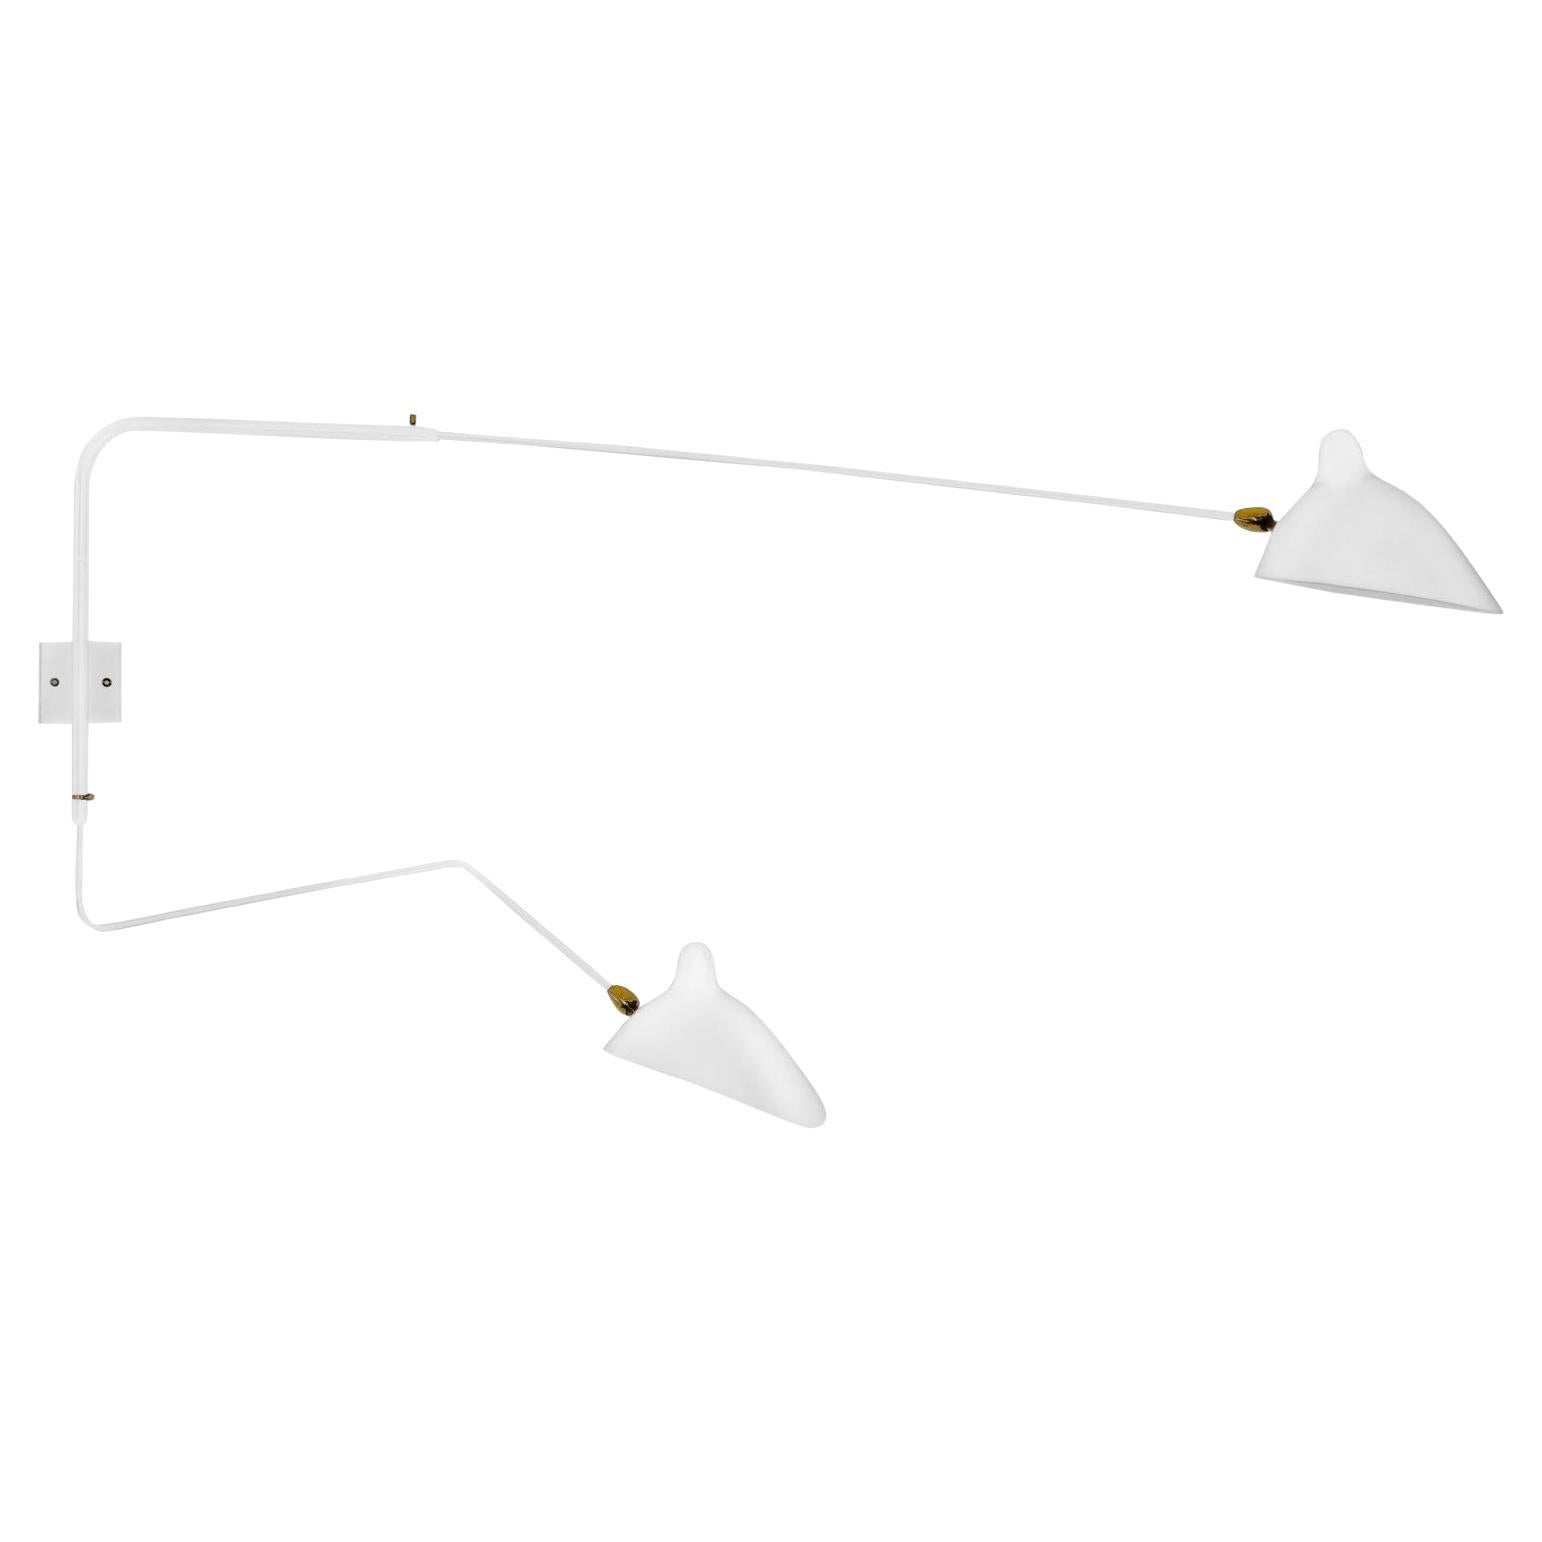 Serge Mouille - Rotating Sconce with 2 Arms (1 Curved) in White - IN STOCK!